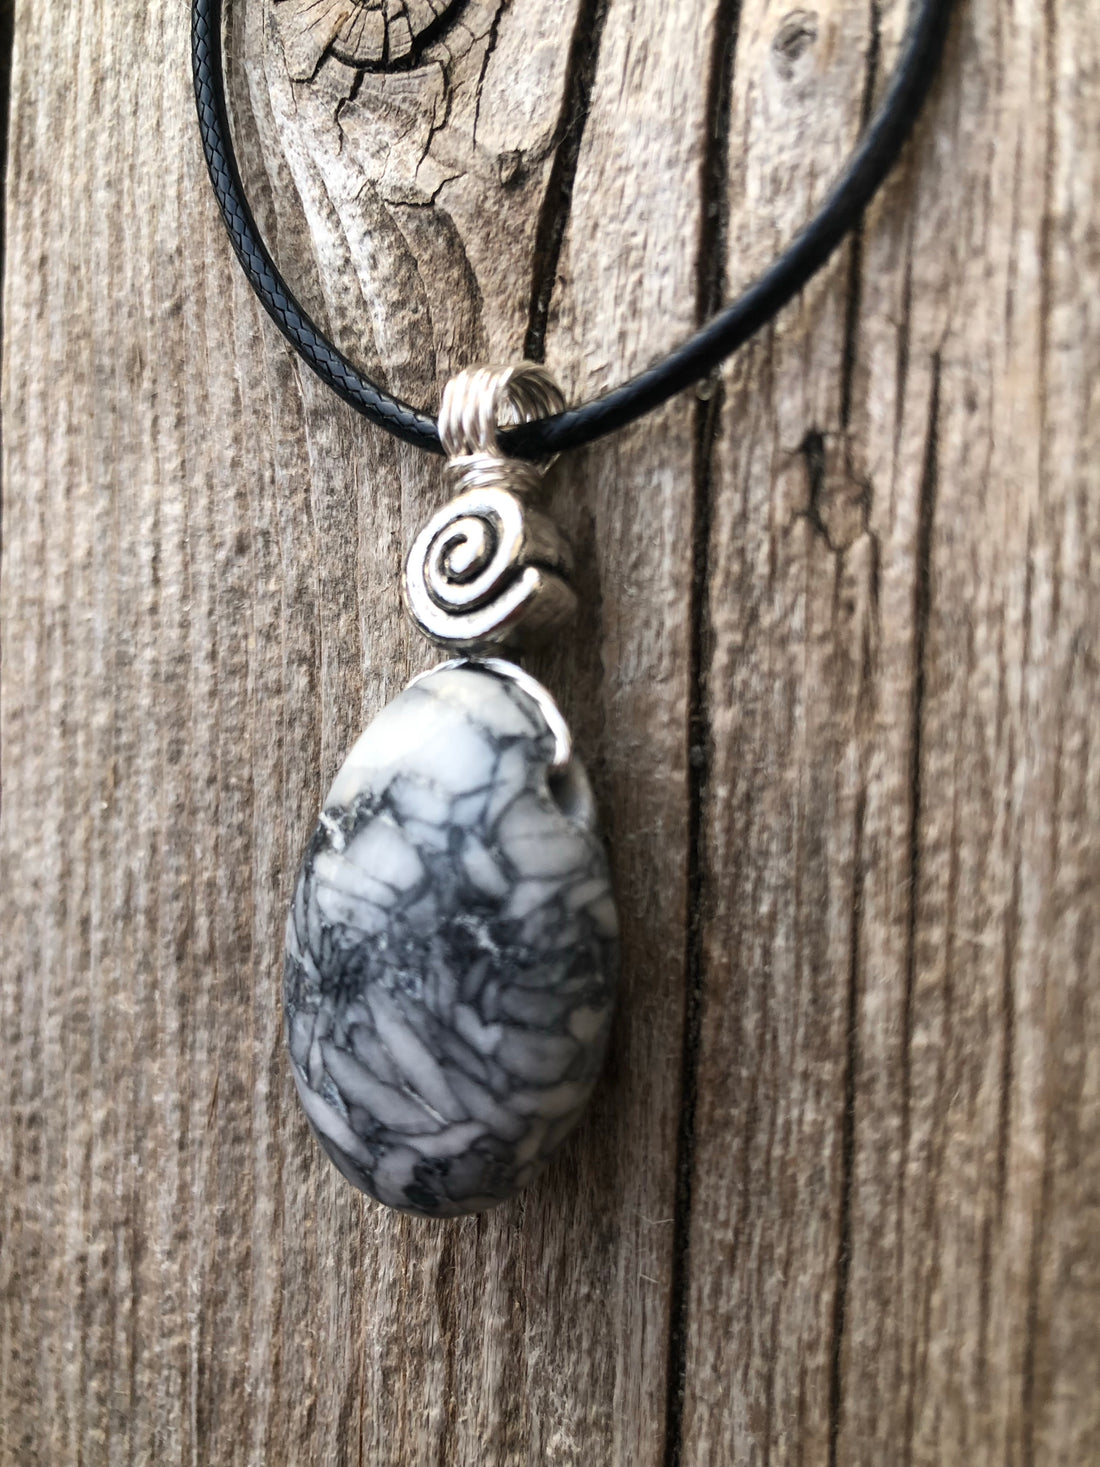 Pinolith for a Deeper Connection to Self, Spiritual Awakening, and Grounding. Swirl to Signify Consciousness.